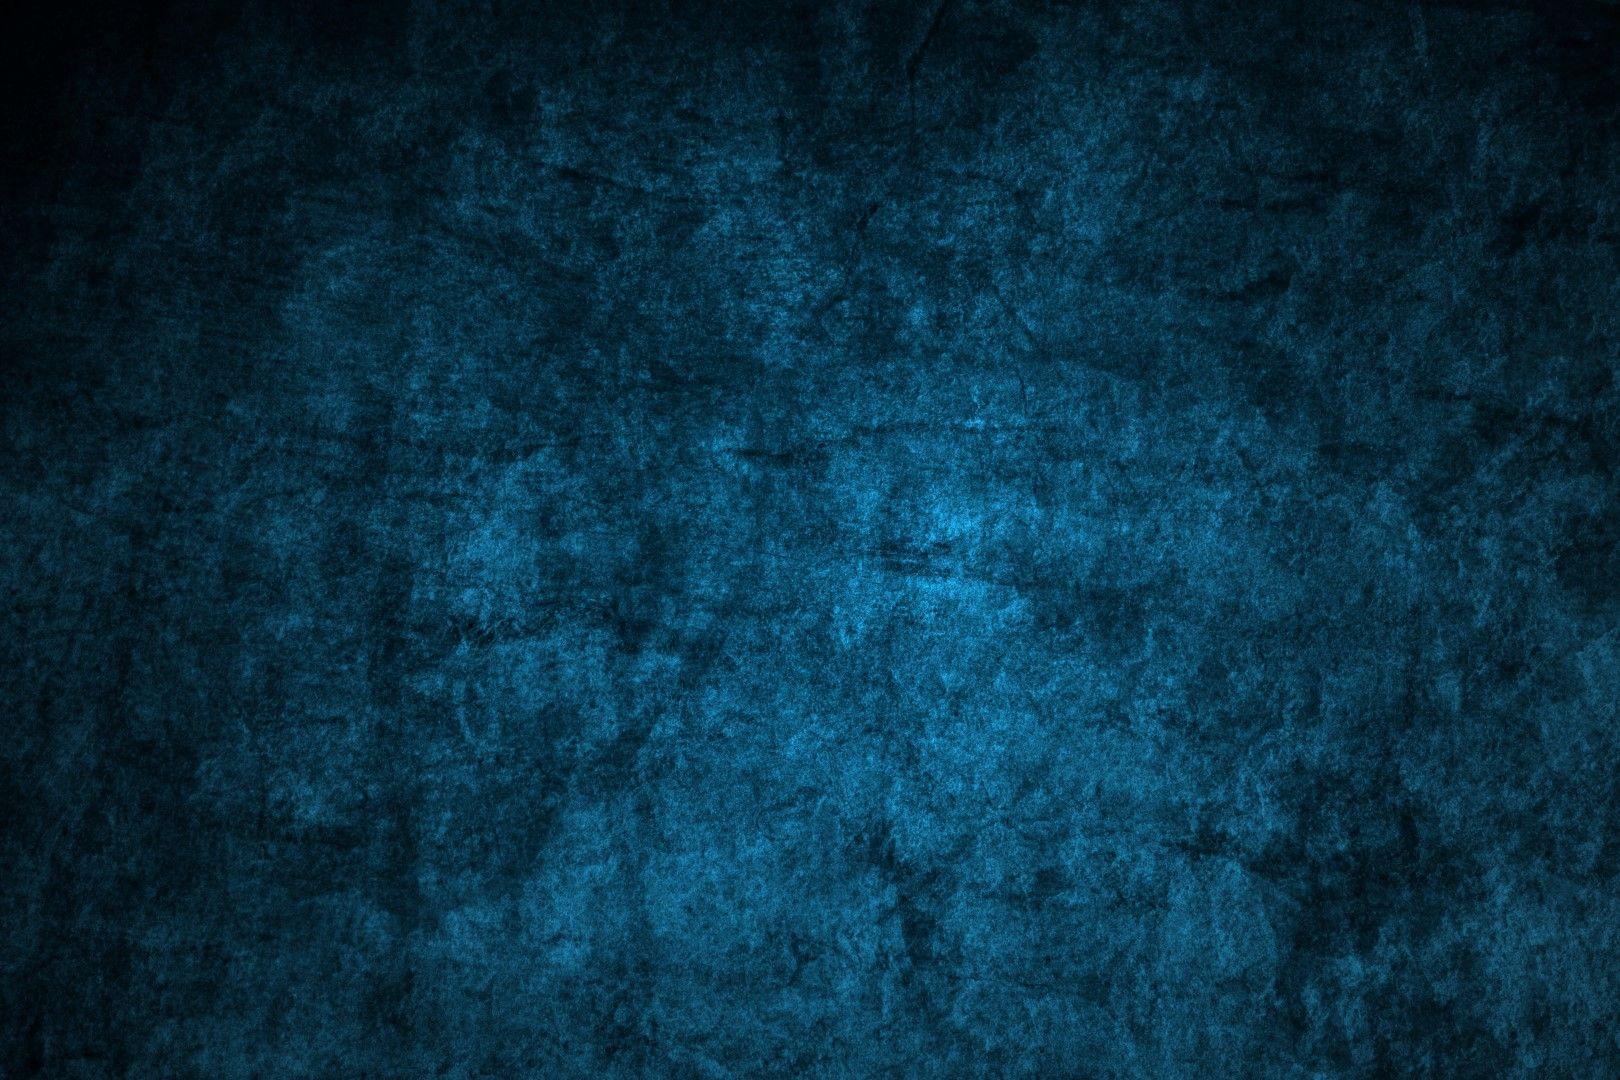 Good quality background image made to be your background